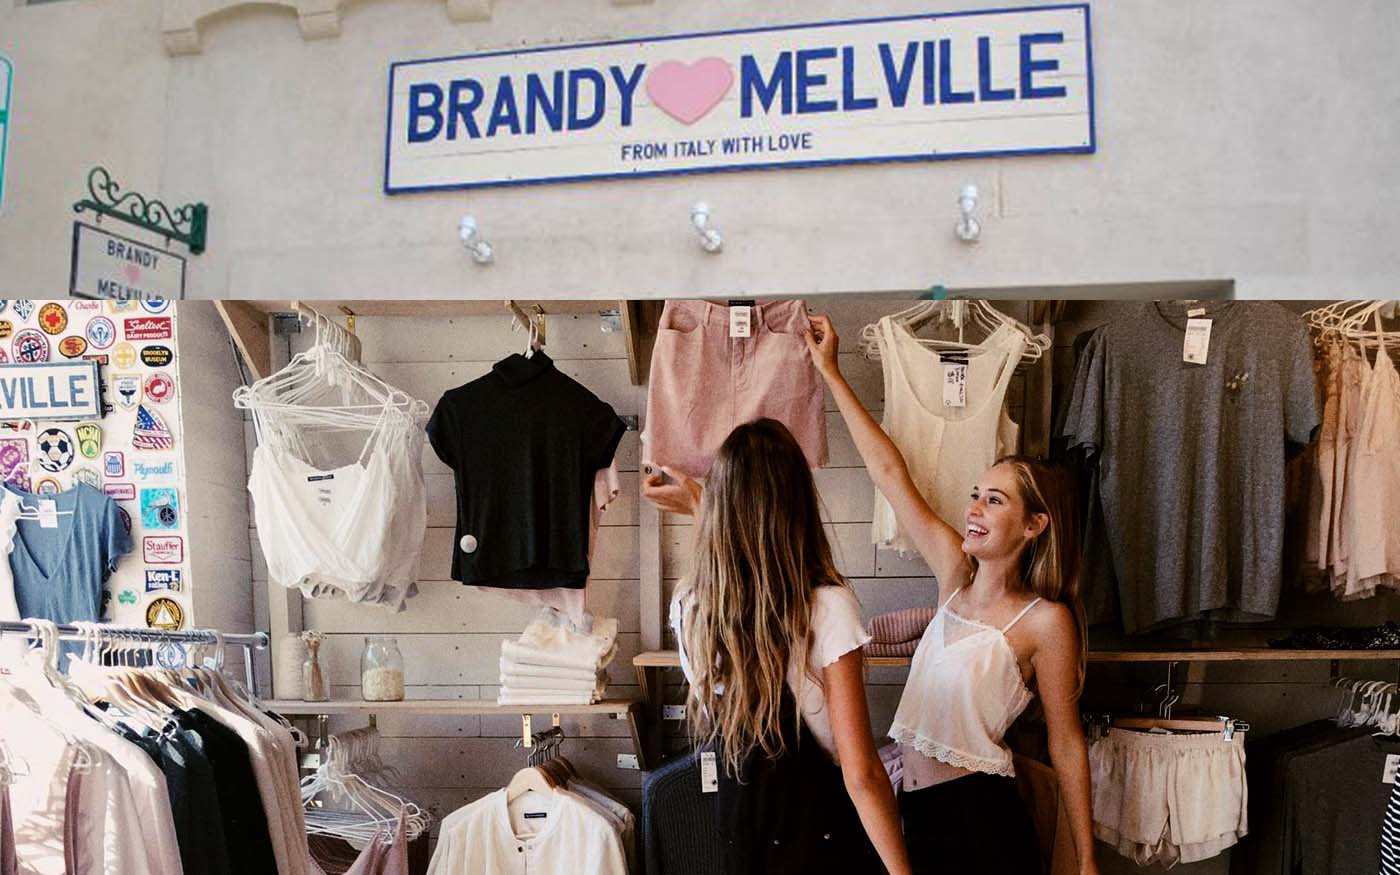 How Long Does Brandy Melville Take To Ship